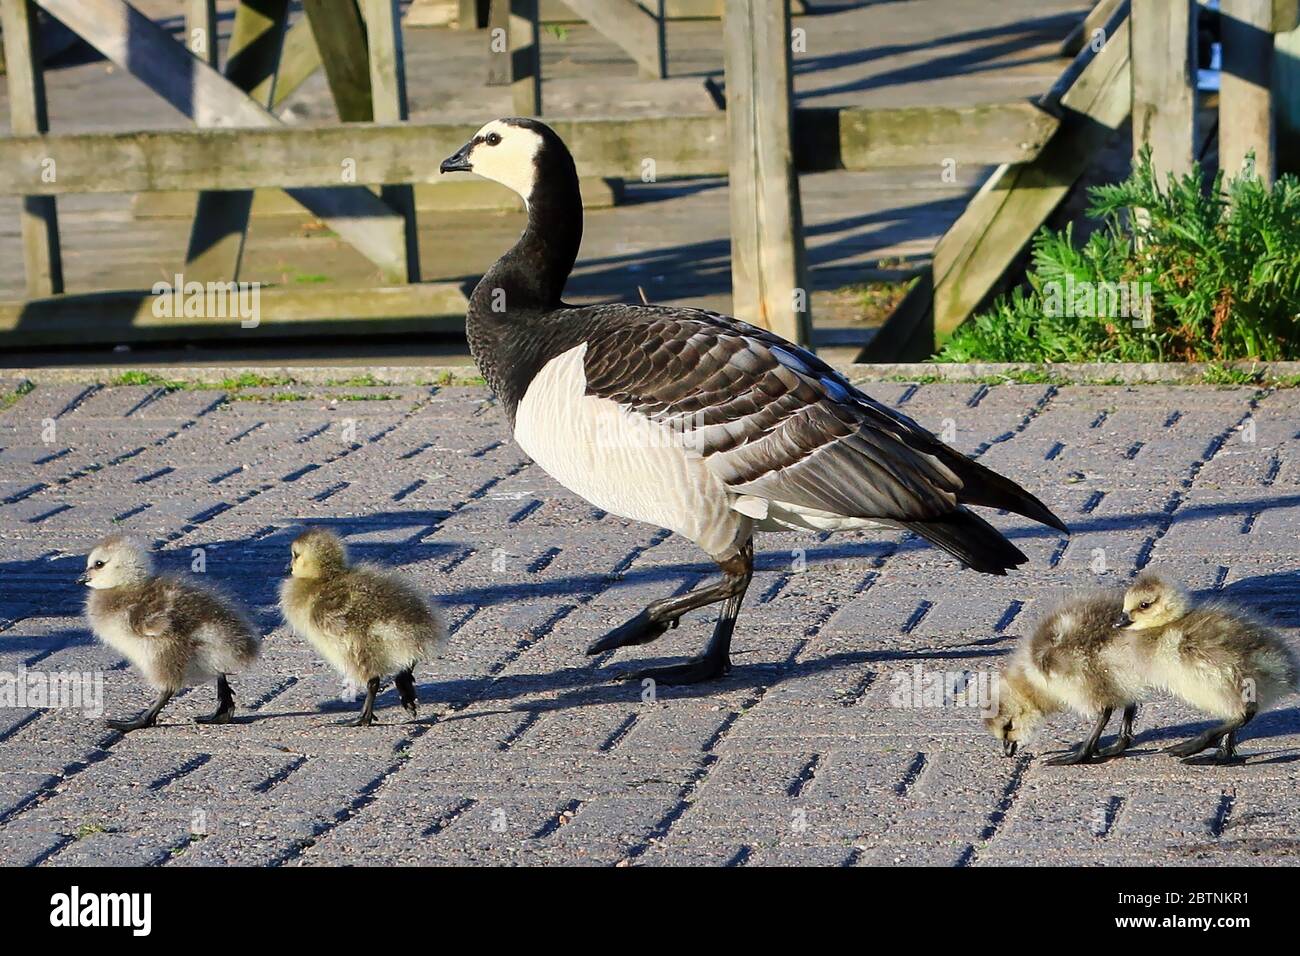 Adult Barnacle goose, Branta leucopsis leading young fuzzy goslings along pavement by the seashore. Helsinki, Finland. Stock Photo